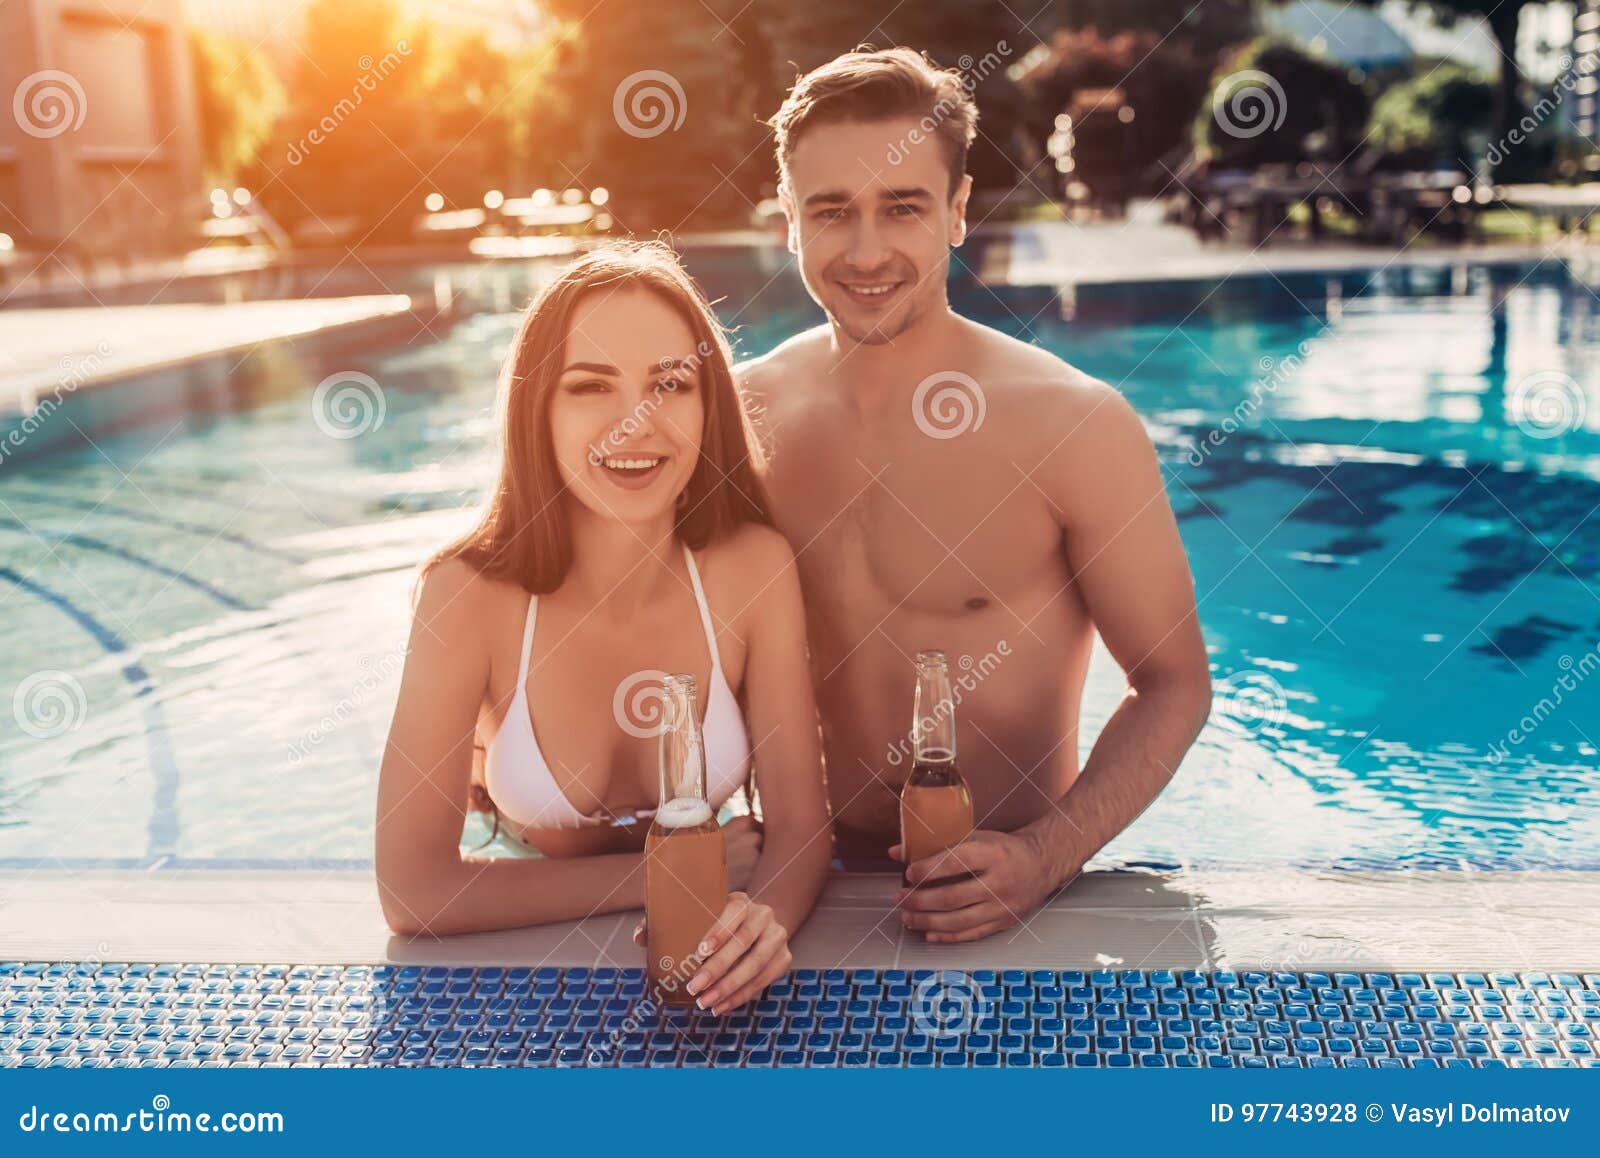 Young couple near swimming pool stock photo (127584) - YouWorkForThem